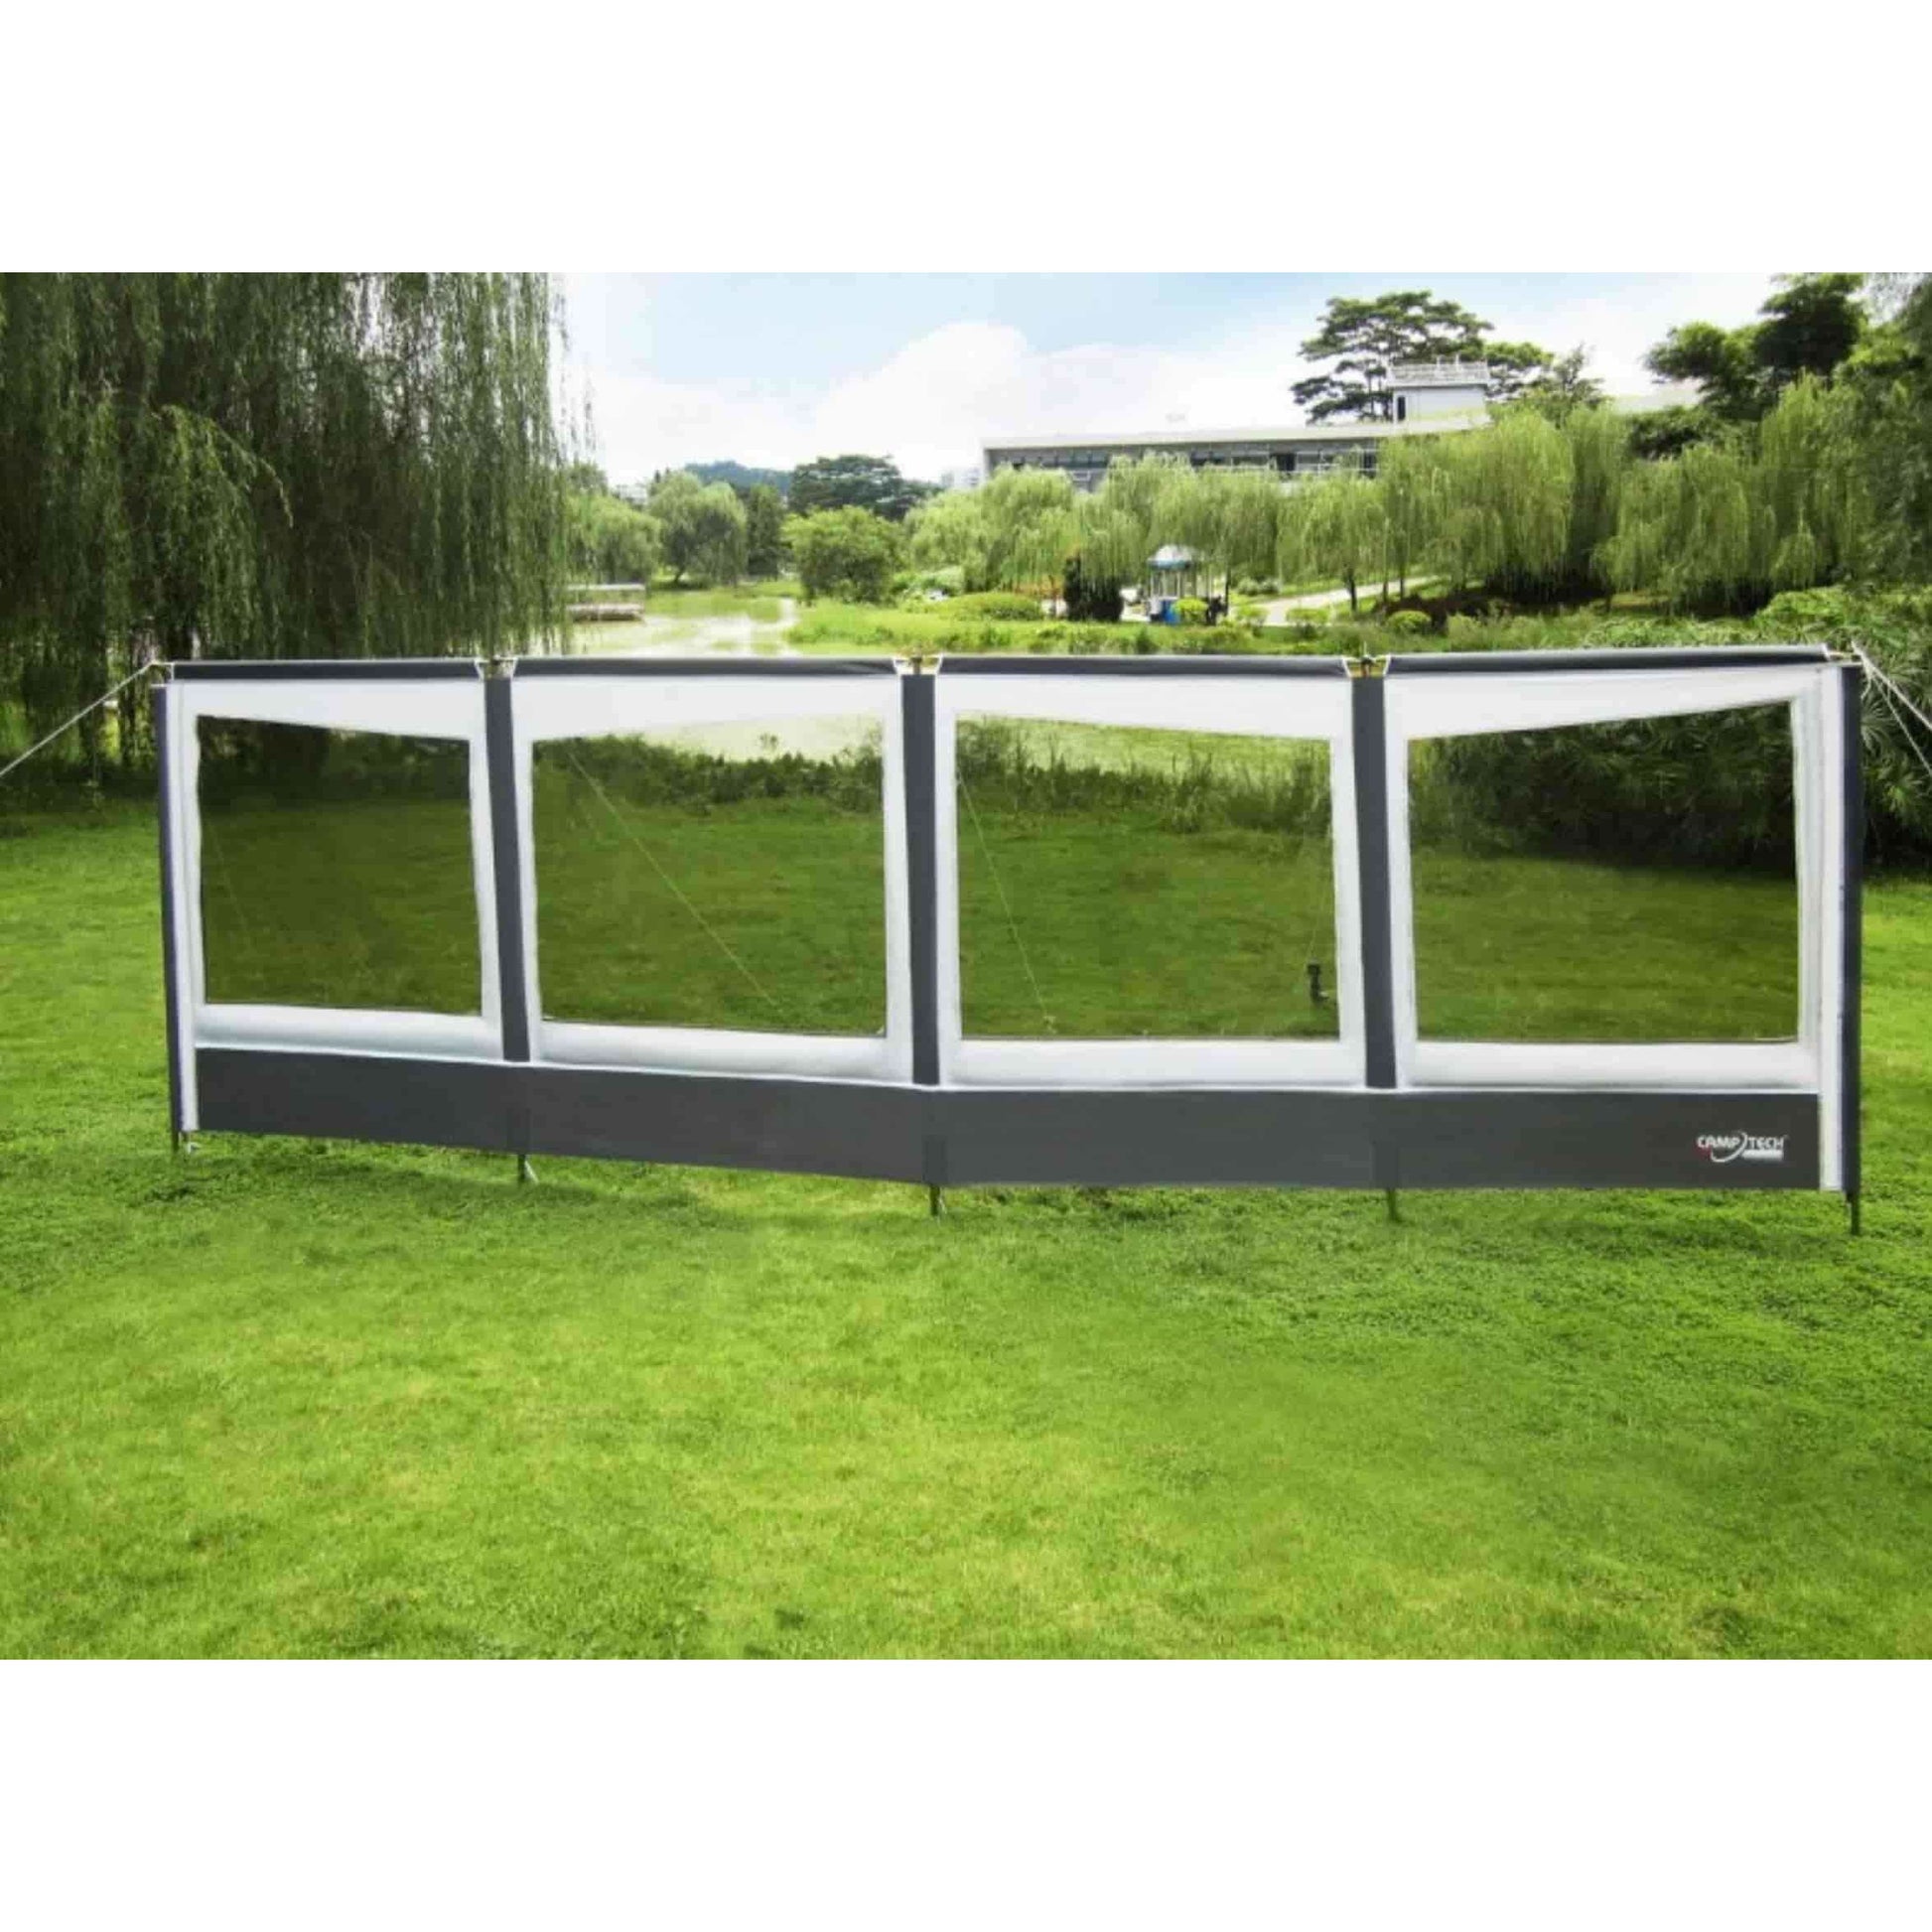 Camptech Carnival Windbreak, Lux SL521-B3D (2019) made by CampTech. A Accessories sold by Quality Caravan Awnings